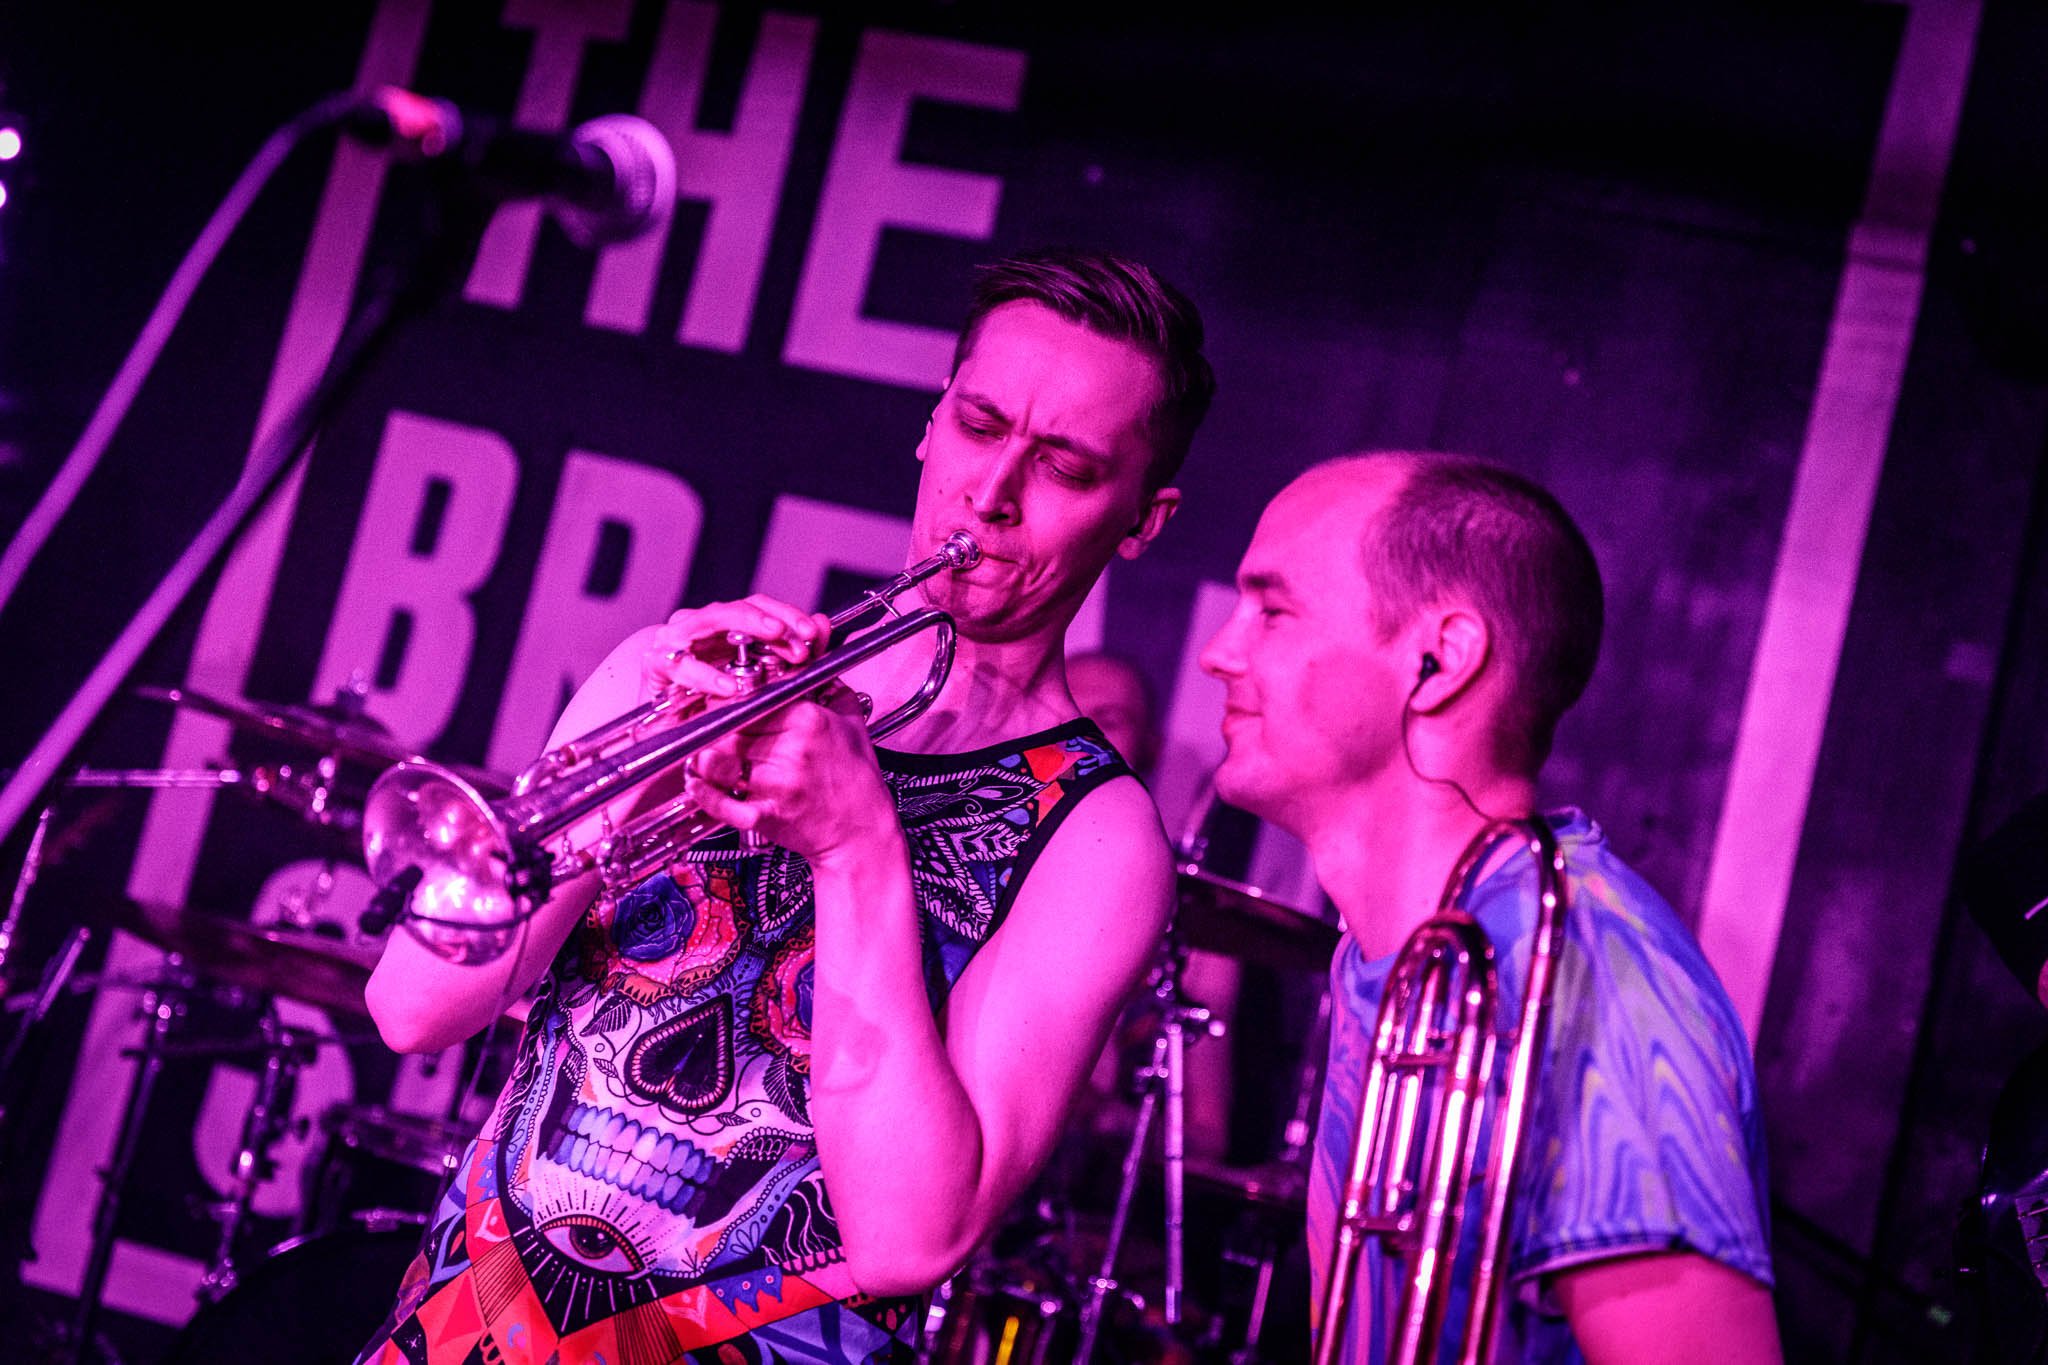 Diablo Swing Orchestra at the Bread Shed in Manchester on May 19